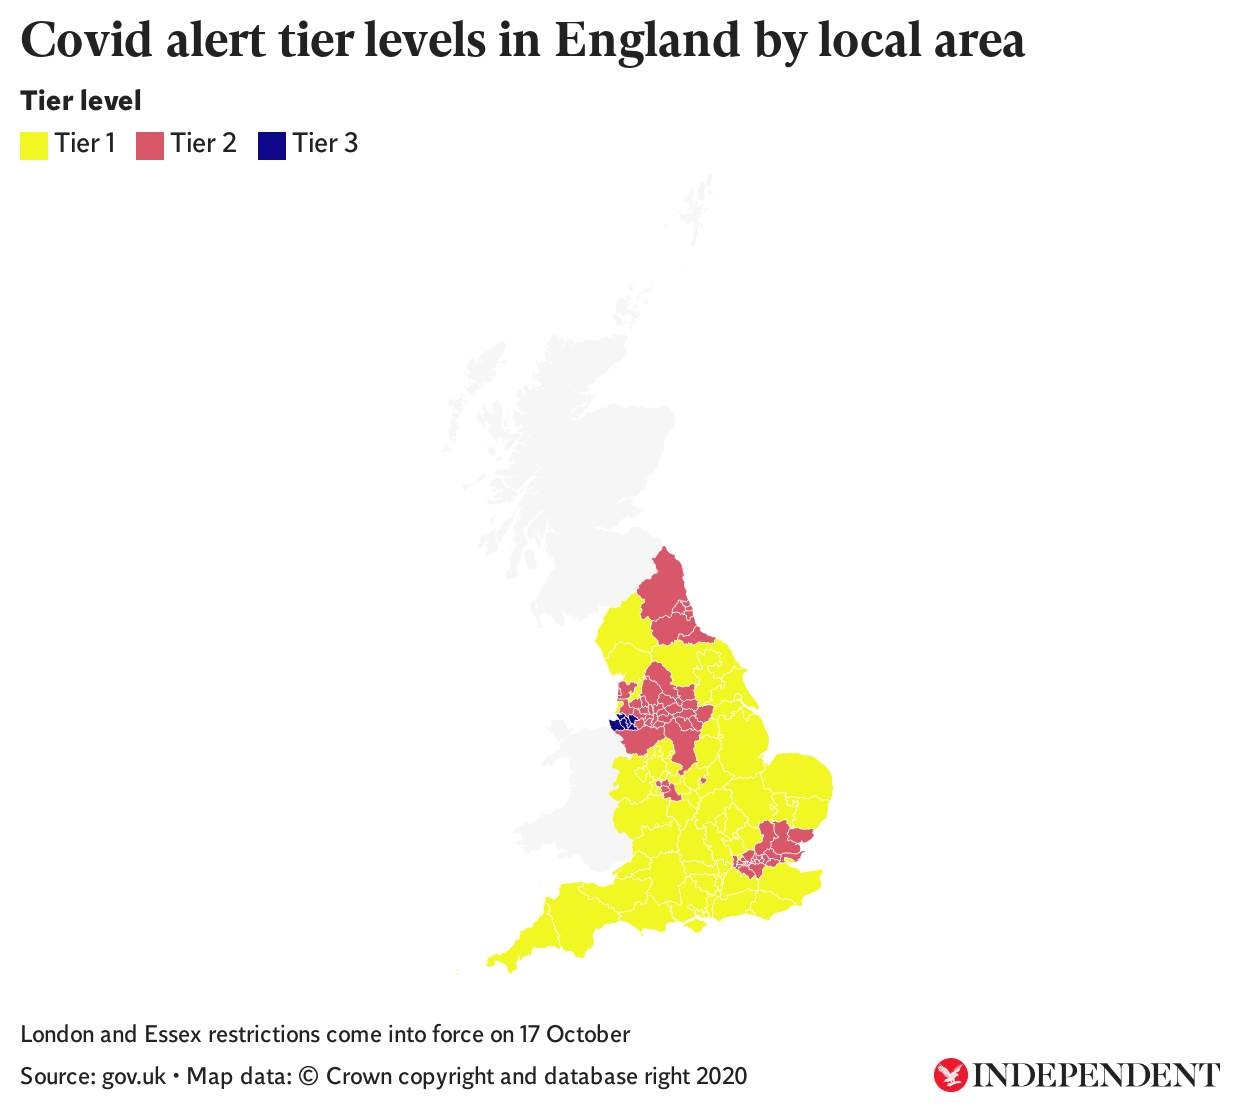 Covid alert tier levels in England by local area